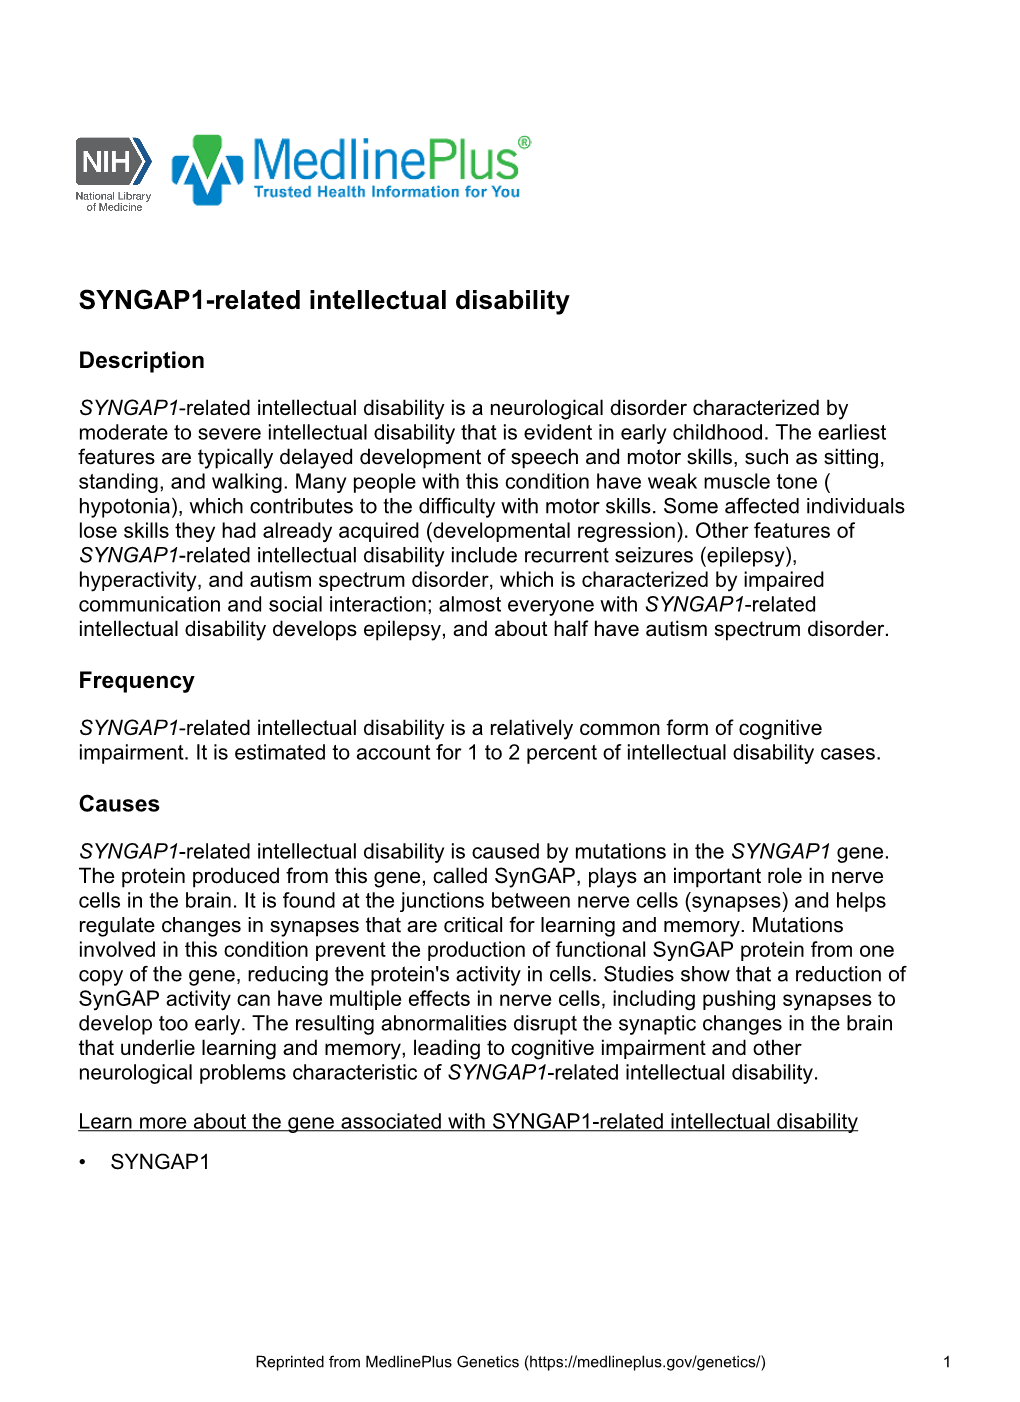 SYNGAP1-Related Intellectual Disability